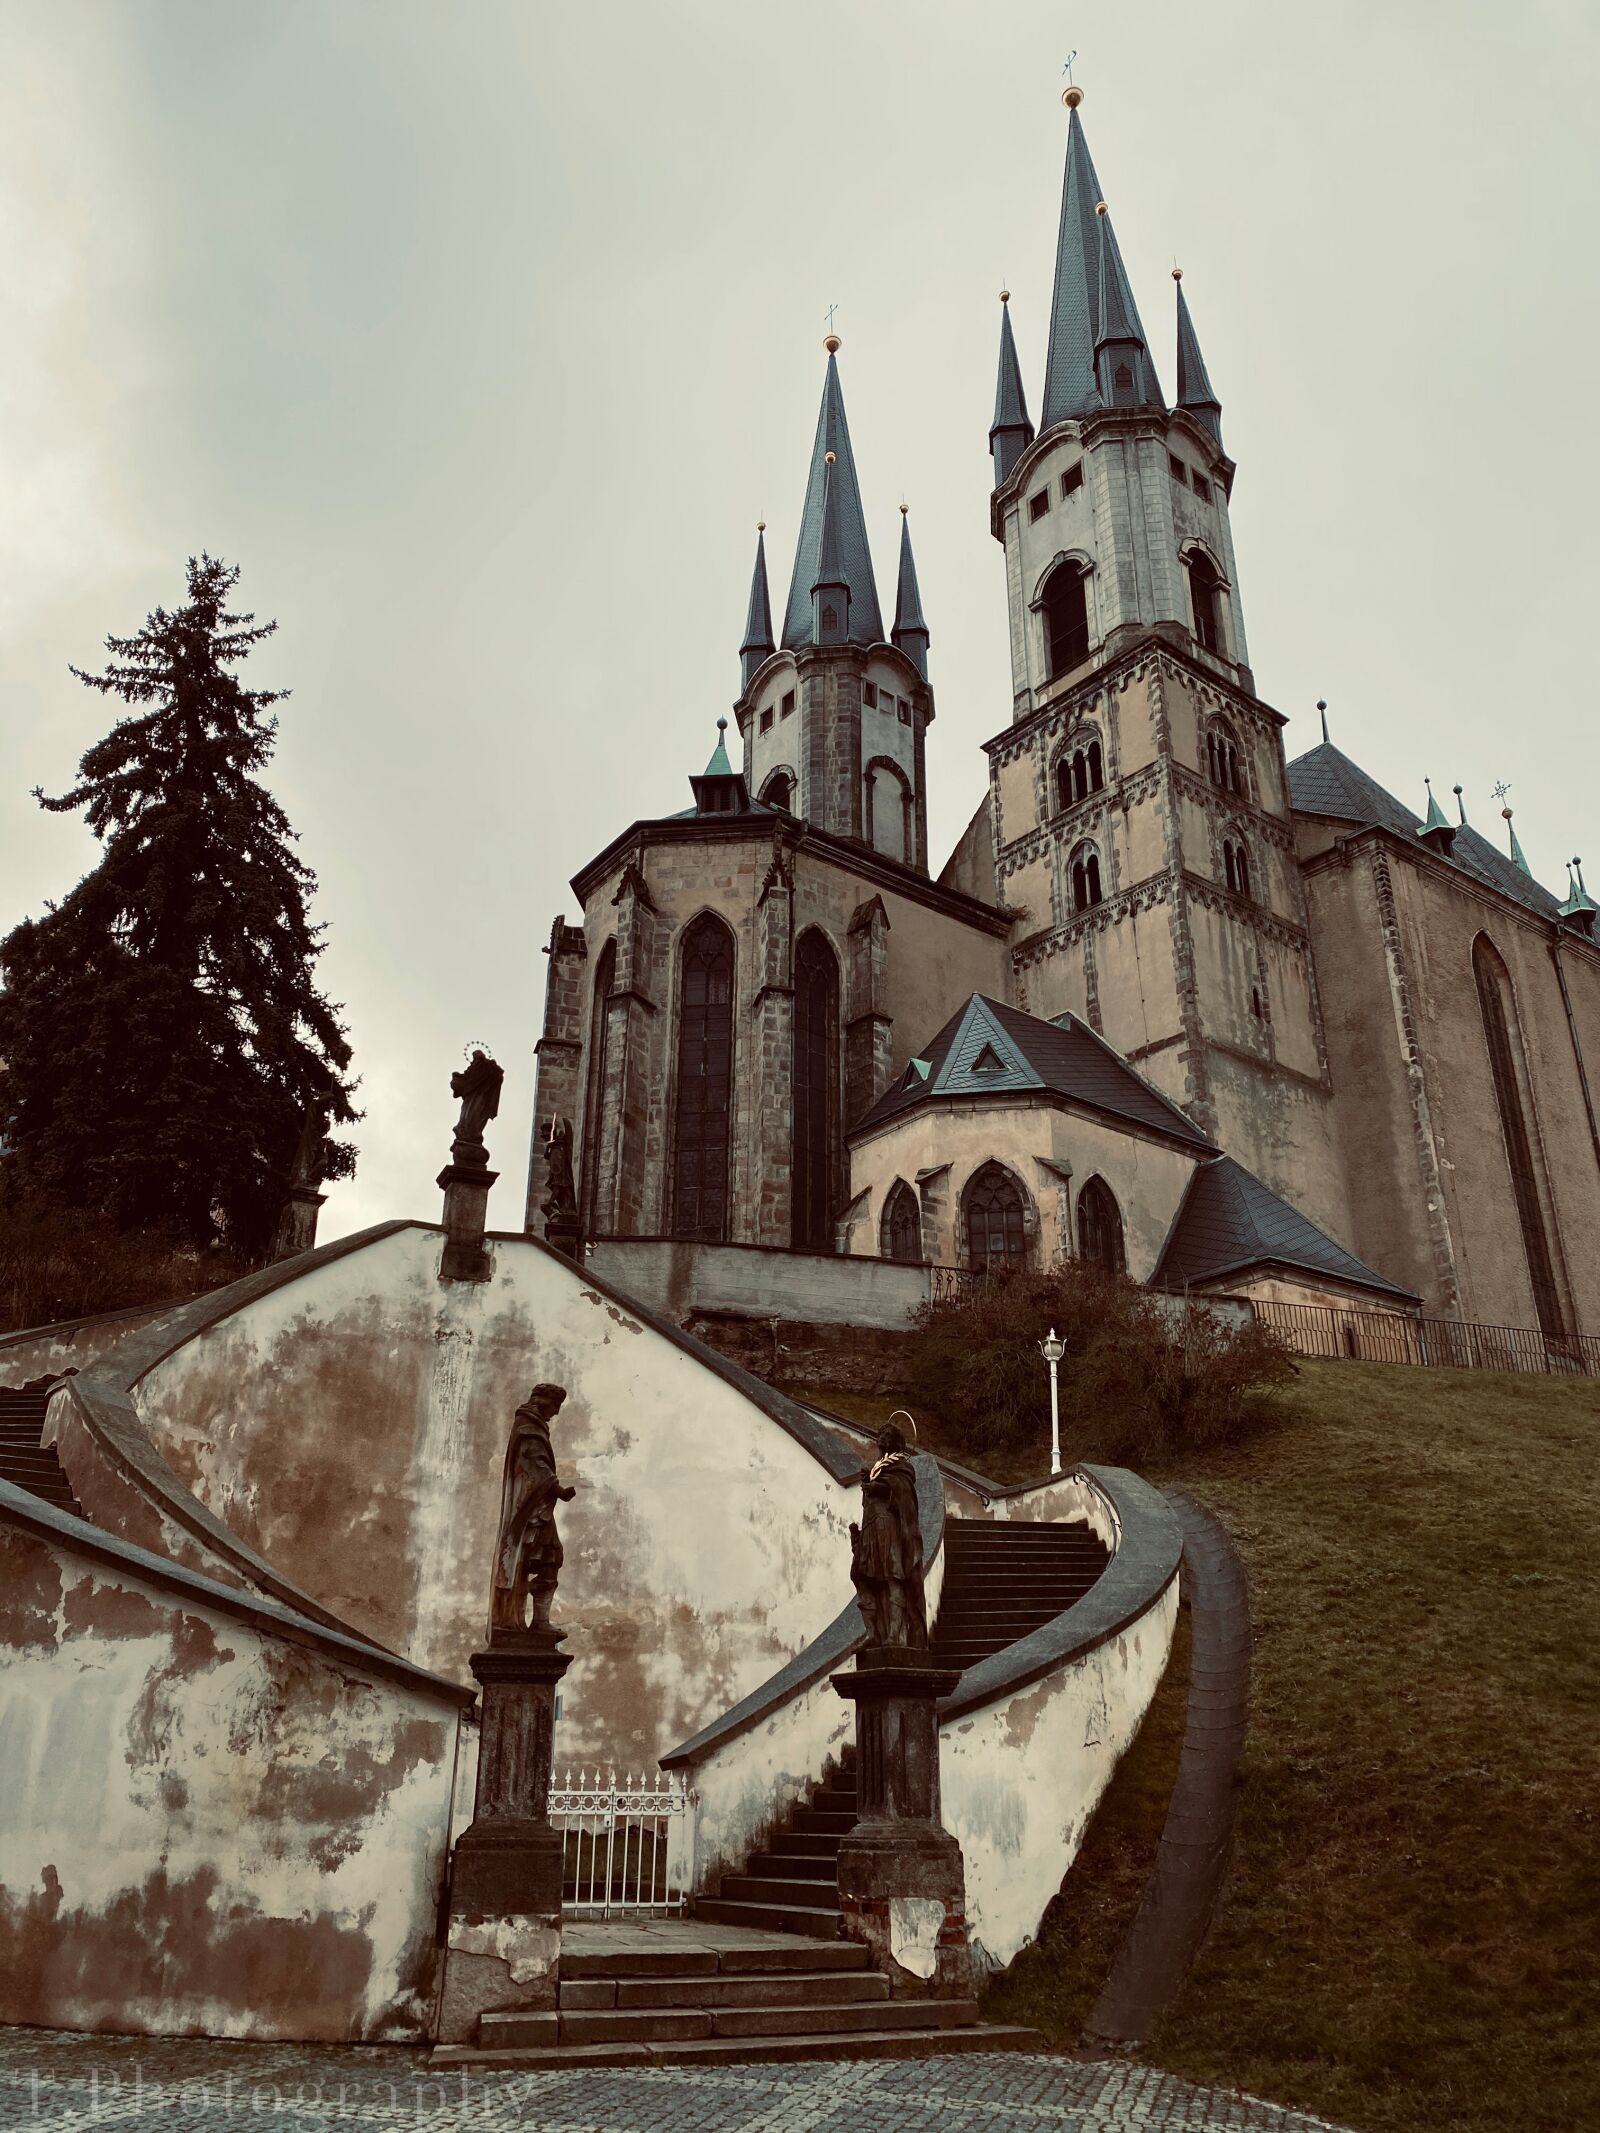 Apple iPhone 11 Pro sample photo. Church, palace, architecture photography